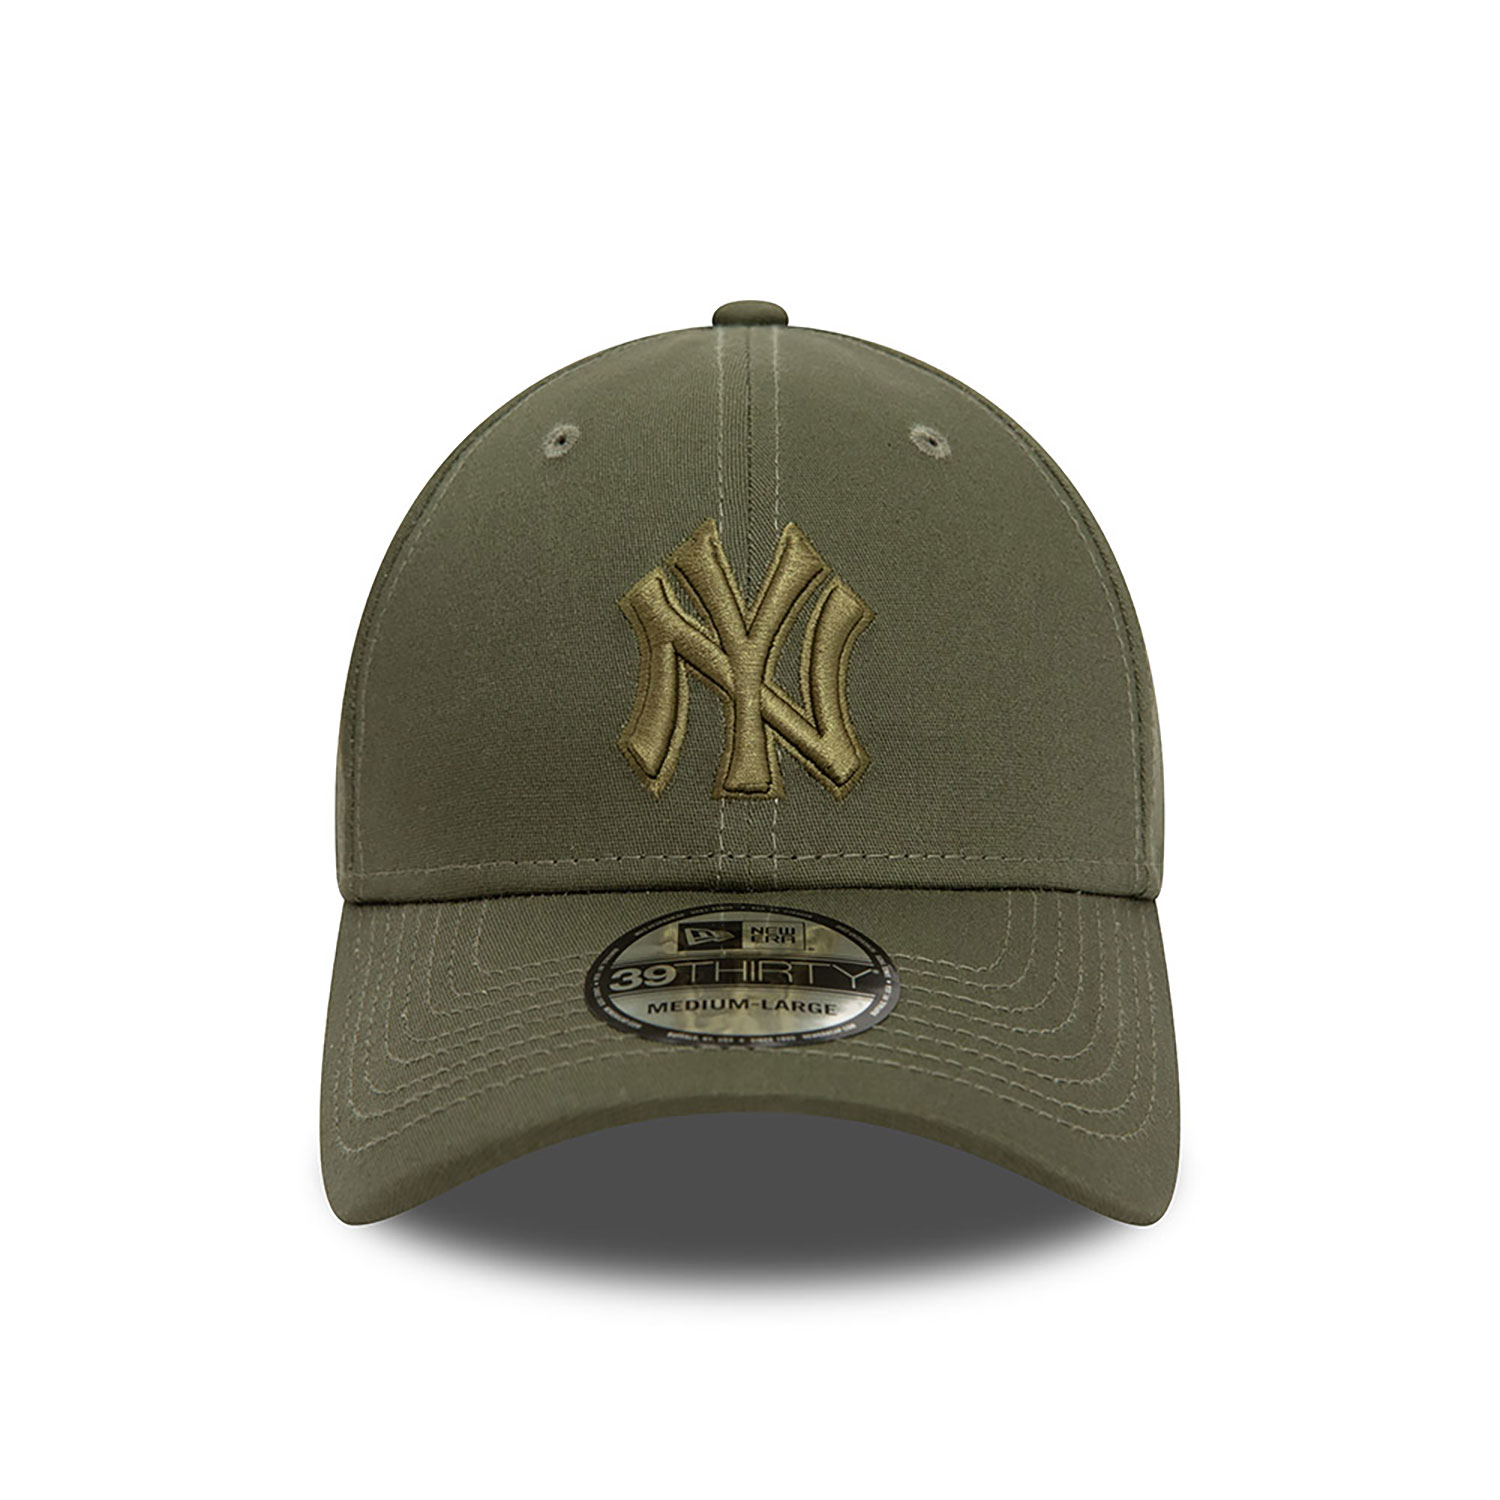 New York Yankees MLB Outline Green 39THIRTY Stretch Fit Cap